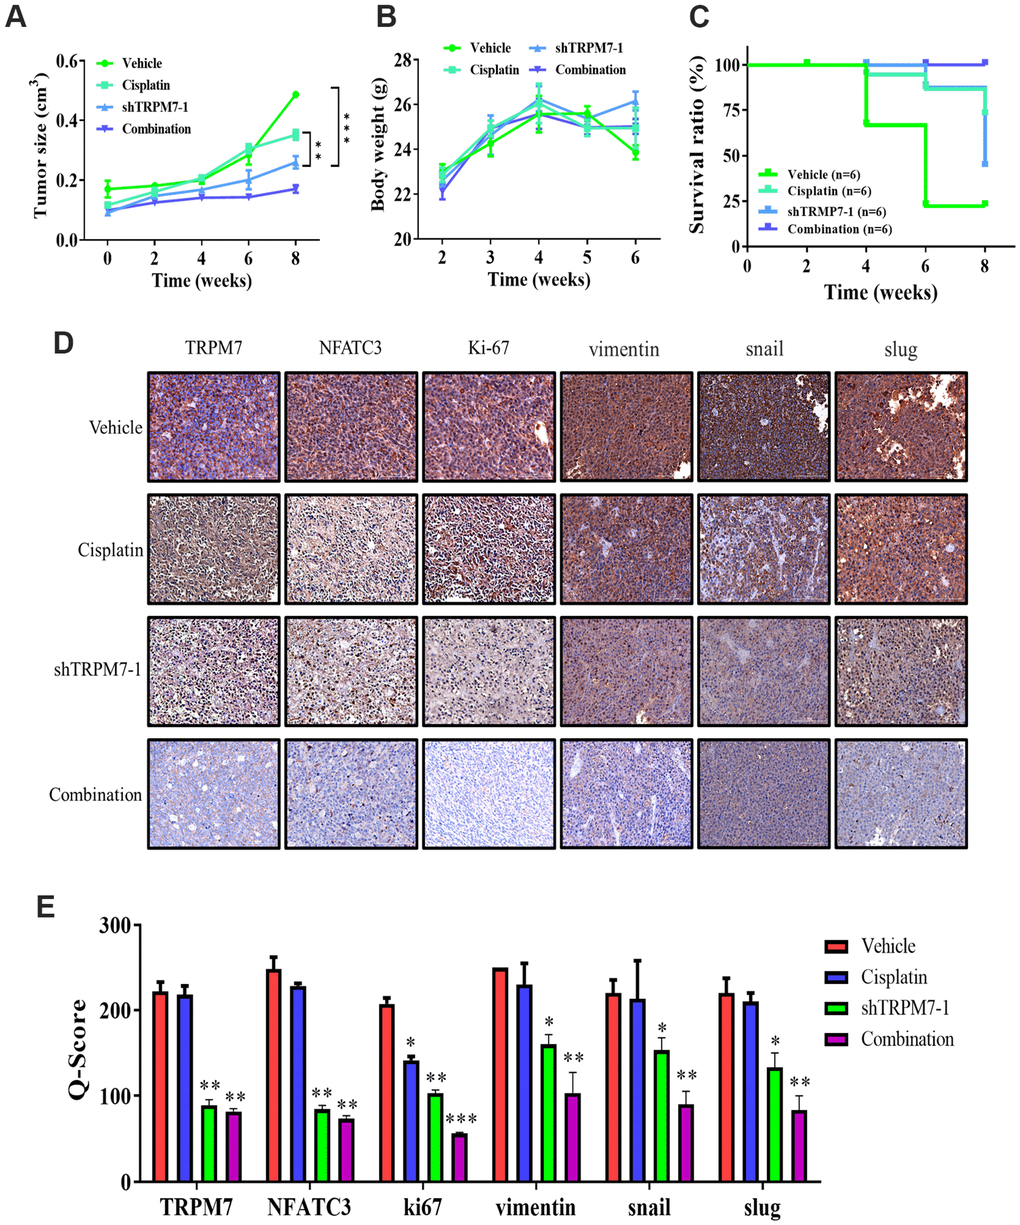 TRPM7 silencing significantly suppresses metastasis in SAS-derived tumor xenograft model in vivo. (A) The tumor curve over time shows that cisplatin and shTRPM7 in combination suppressed tumor growth. (B) The average body weight over time curve demonstrated no apparent systematic toxicity in the mice receiving combined treatment. (C) The Kaplan–Meier survival curve shows that the mice receiving combined treatment had the highest survival ratio compared to the other groups. (D) Immunostaining analysis of tumor sections showed that the combined treatment suppressed NAFTC3 and ki67 expression the most, compared with other groups. **P E) Bar graph showing the comparison of Q-score for tissue expression in tumor section resulted significant inhibition of NFATC3, ki67, and EMT markers vimentin, snail, and slug. *p 